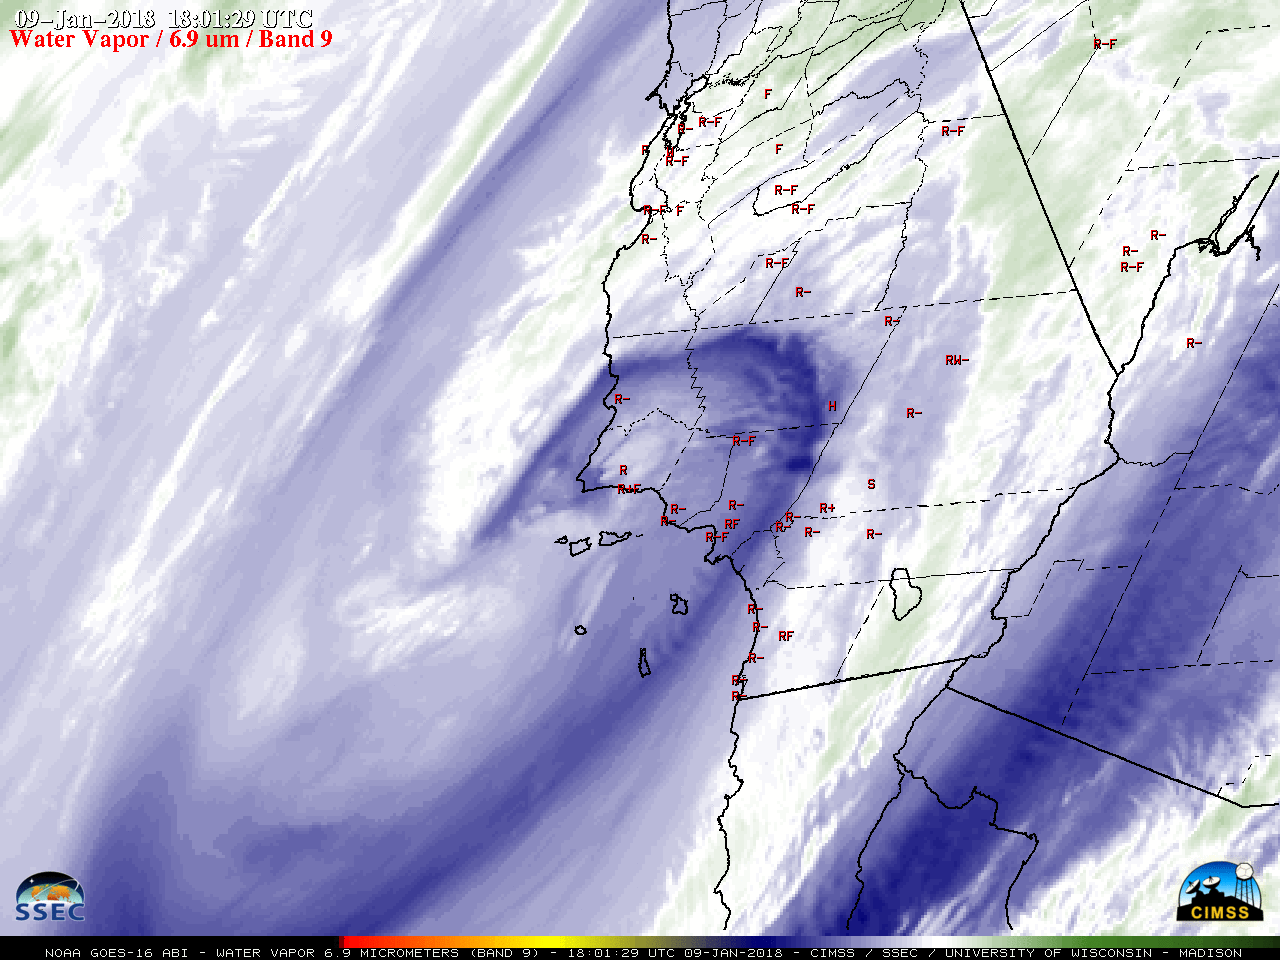 1-minute GOES-16 Water Vapor (6.9 µm) images; with hourly reports of surface weather type plotted in red [click to play MP4 animation]